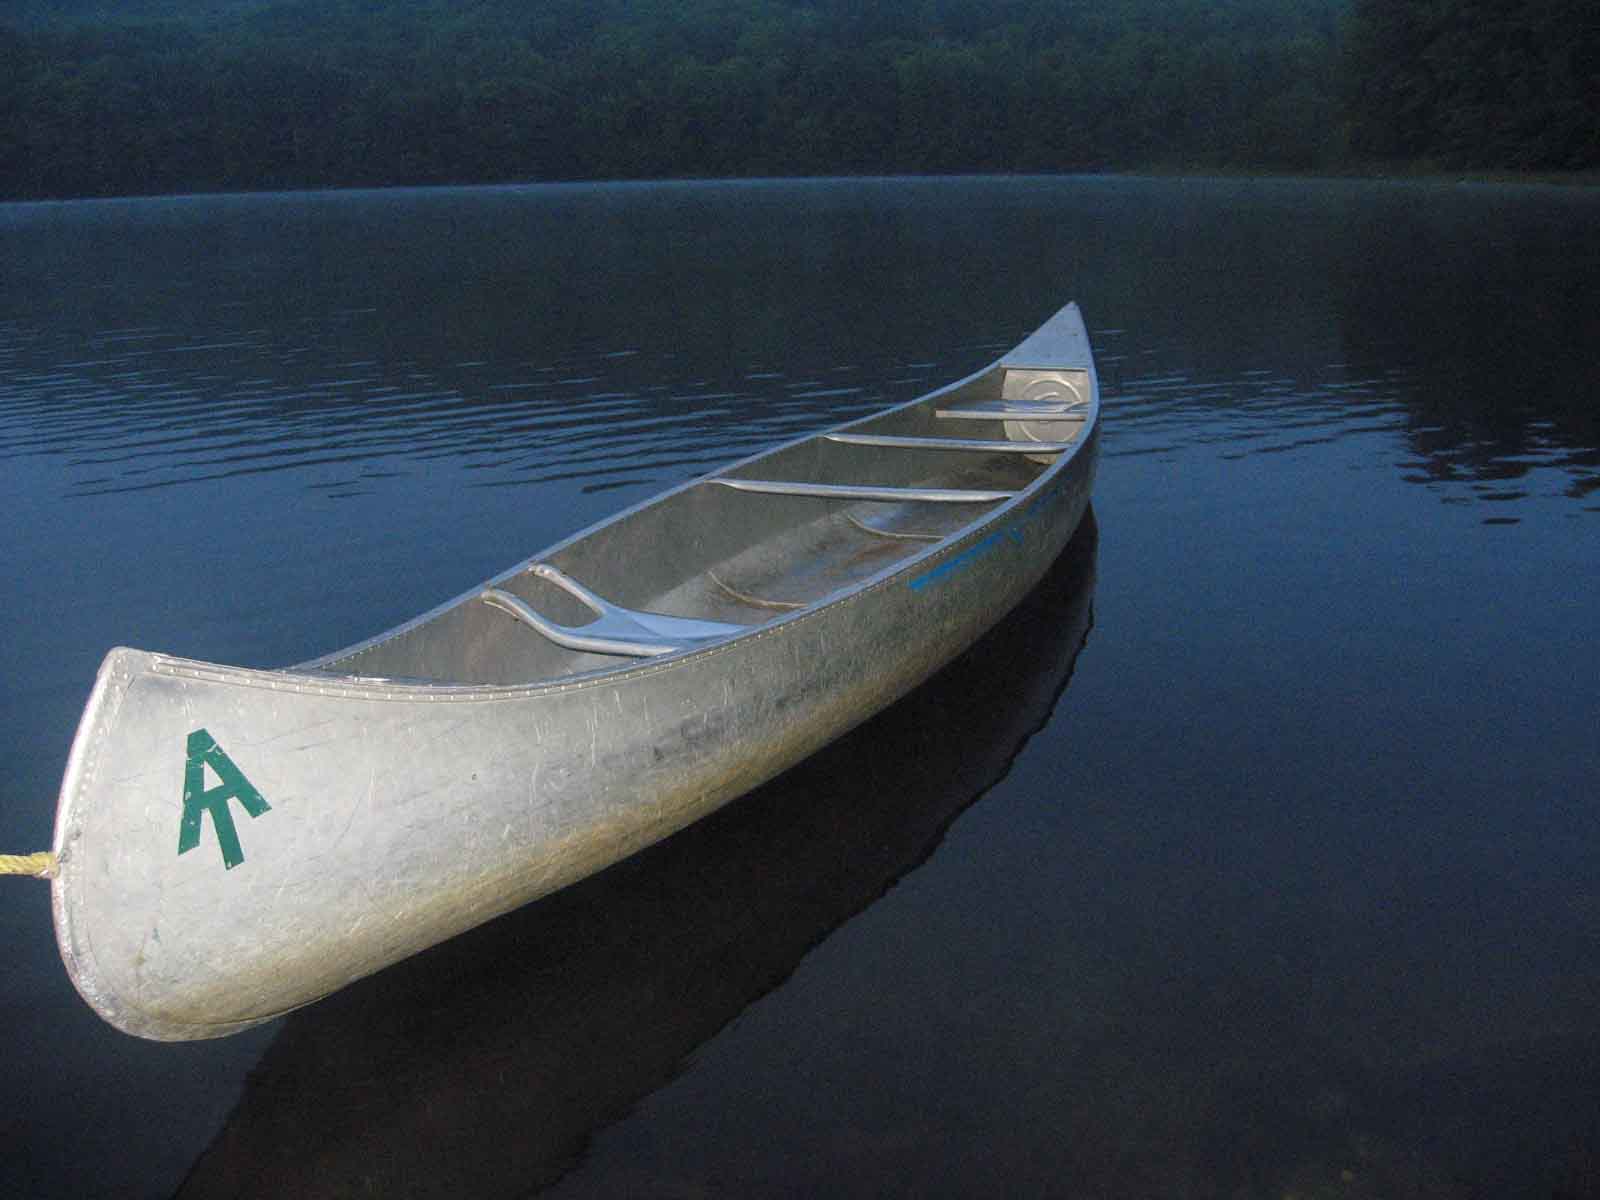 The caretakers canoe by Upper Goose Pond.